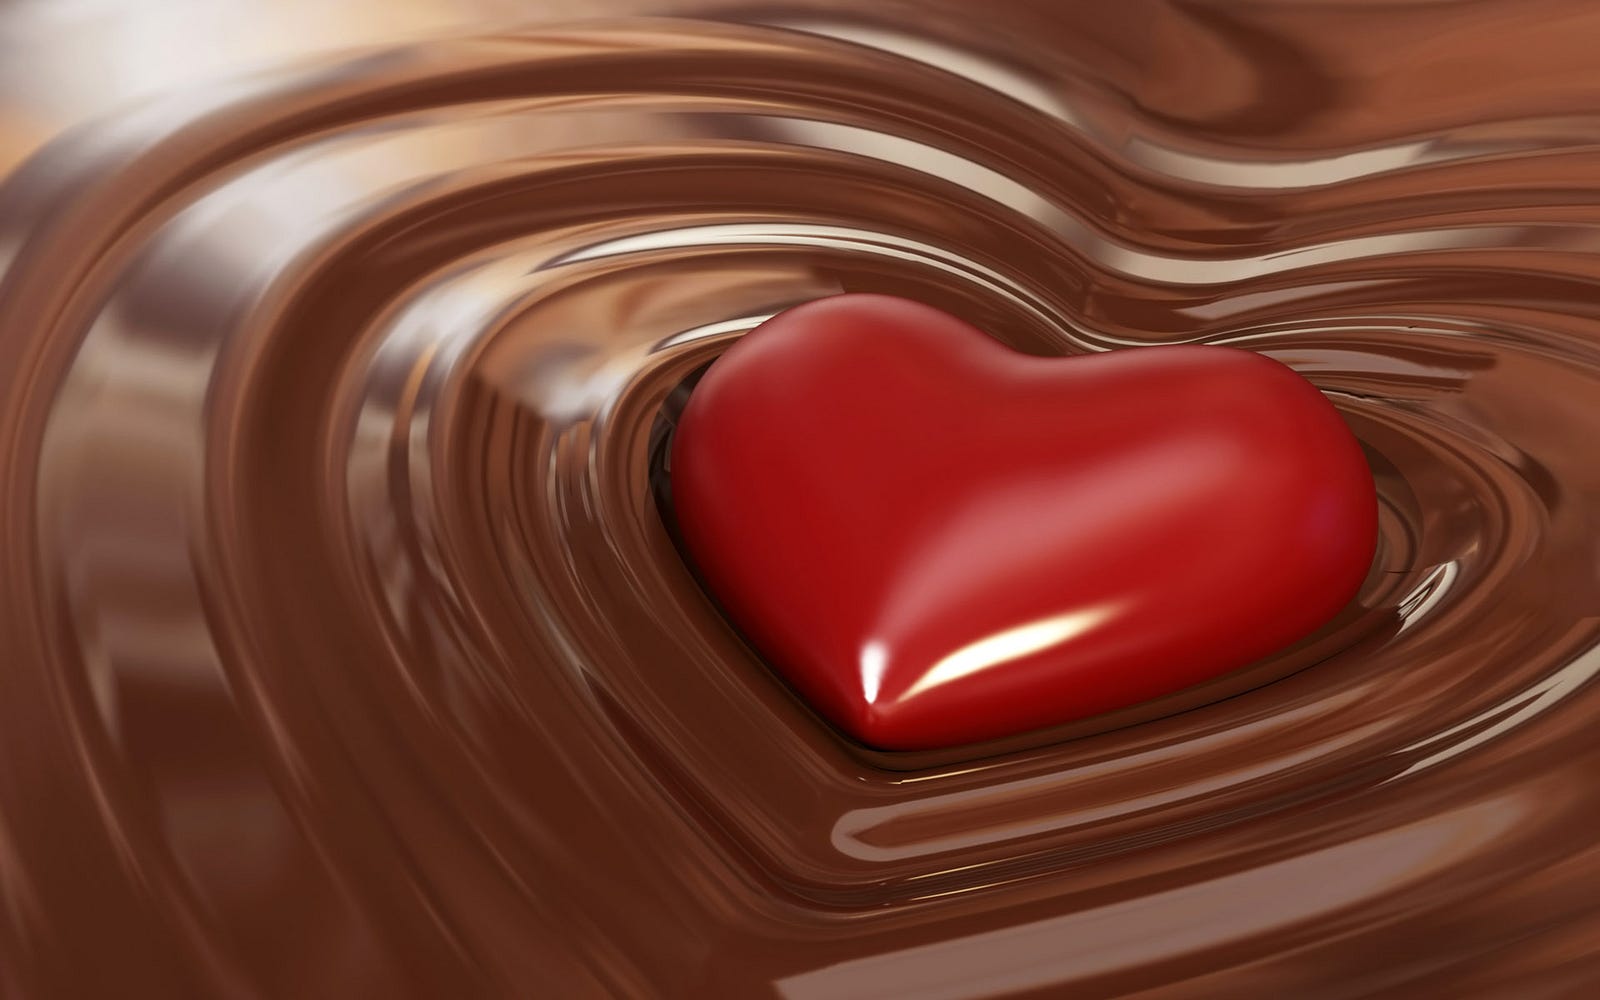 Your feelings can t be imprinted on the chocolate but a quote can well describe it And that s the way to express your feelings silently